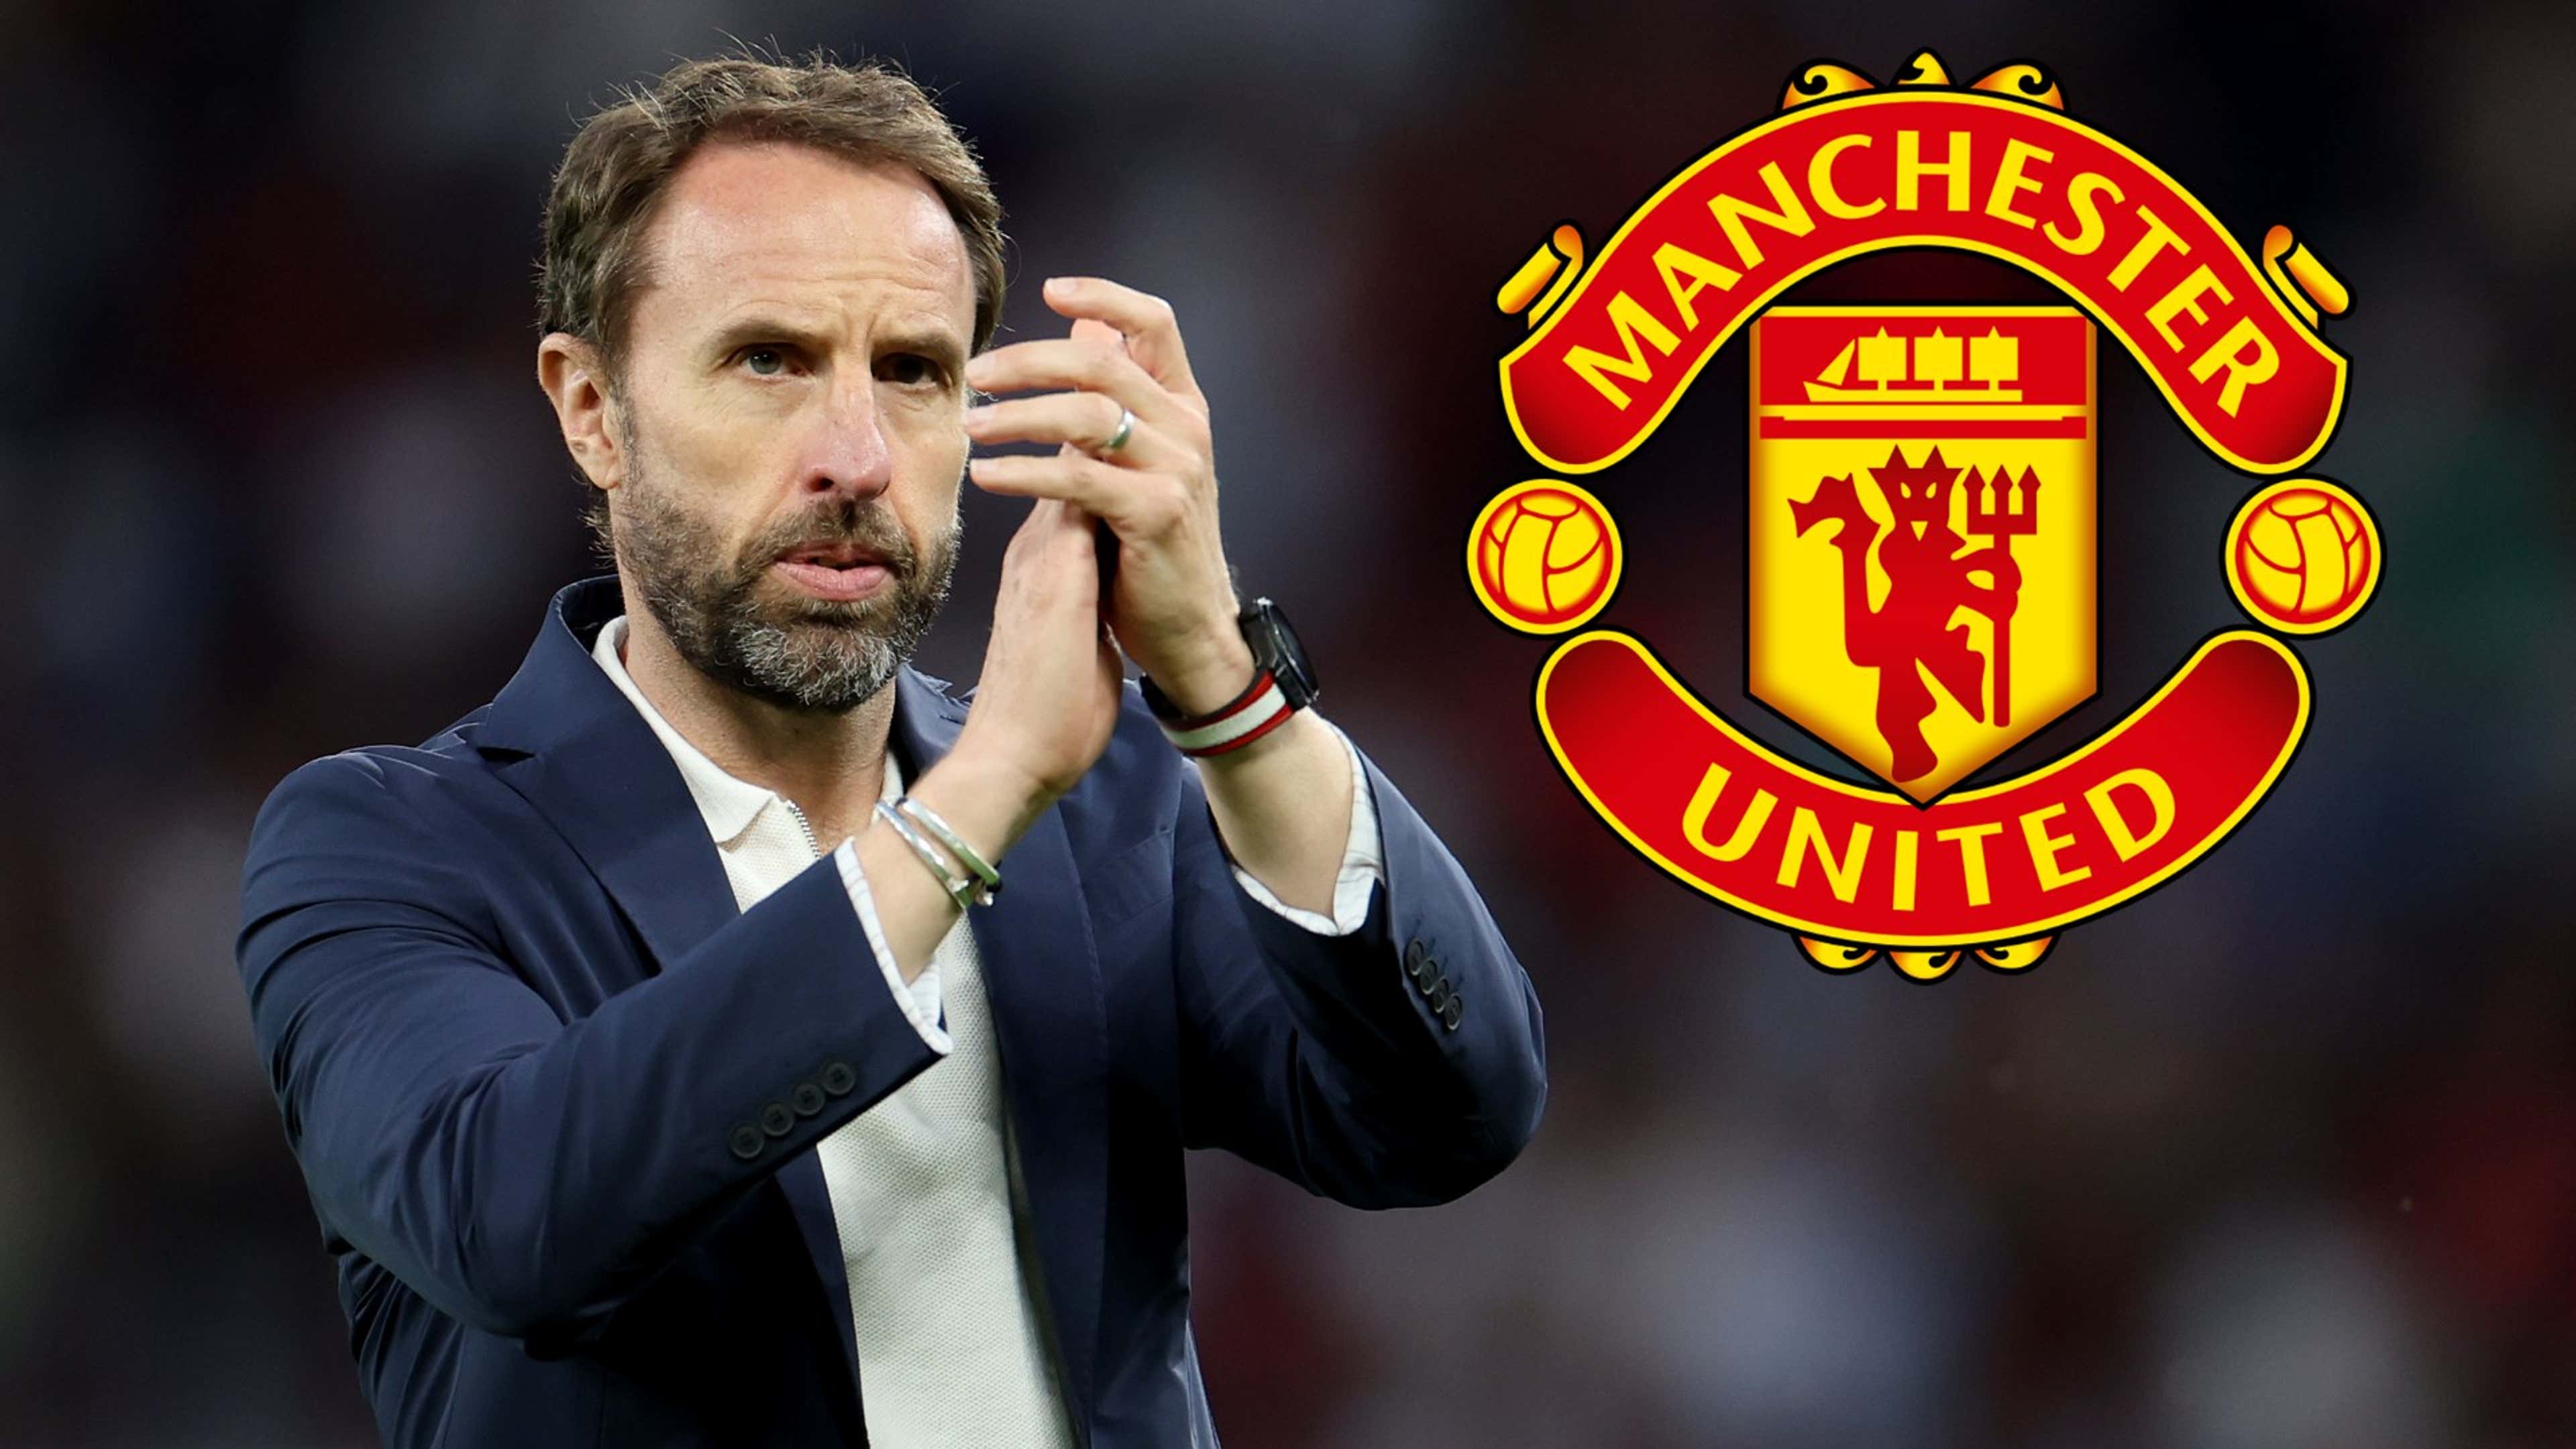 Gareth Southgate is the ideal candidate for Man Utd: England boss' focus on  young players and team values can revitalise Red Devils